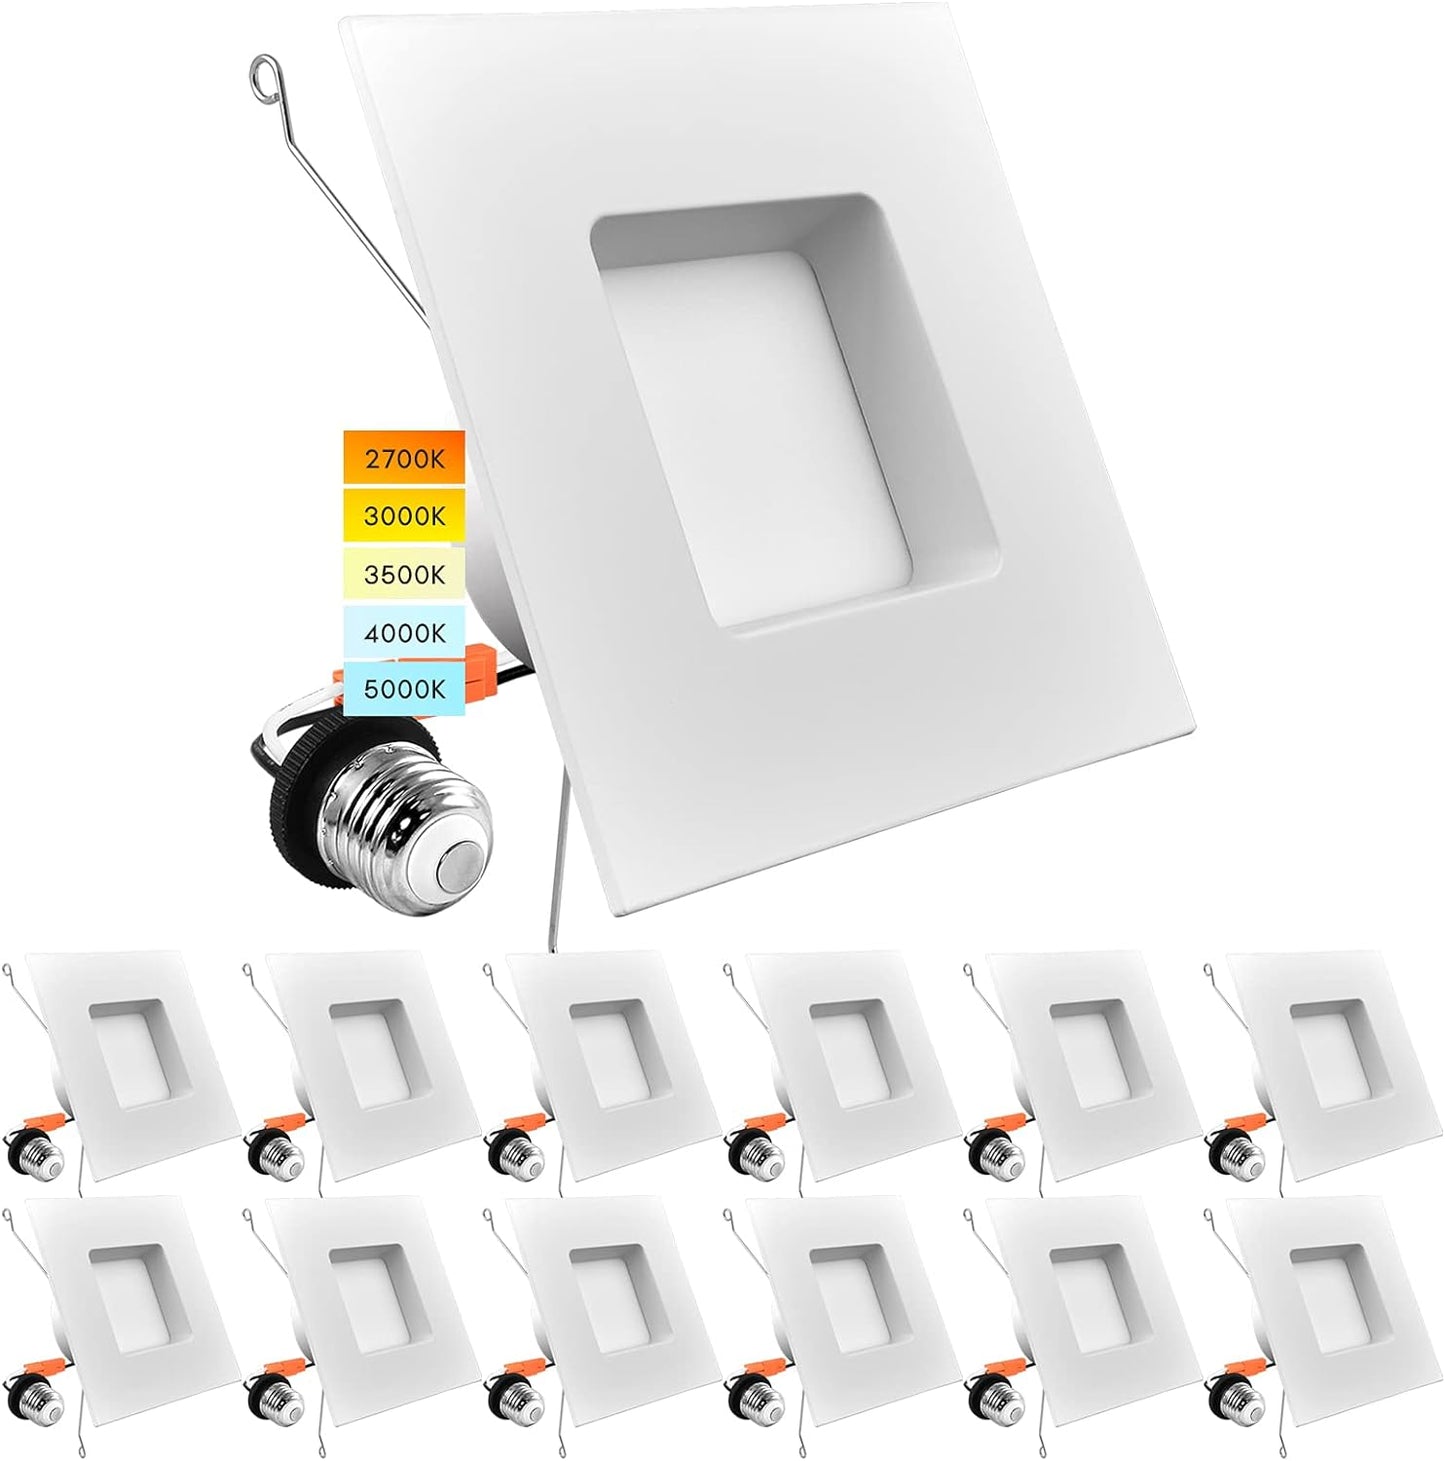 LUXRITE 12 Pack 5/6 Inch LED Square Recessed Lighting, 14W=90W, 5 Color Selectable 2700K | 3000K | 3500K | 4000K | 5000K, Dimmable LED Downlight, 1100 Lumens, Wet Rated, Energy Star, IC Rated